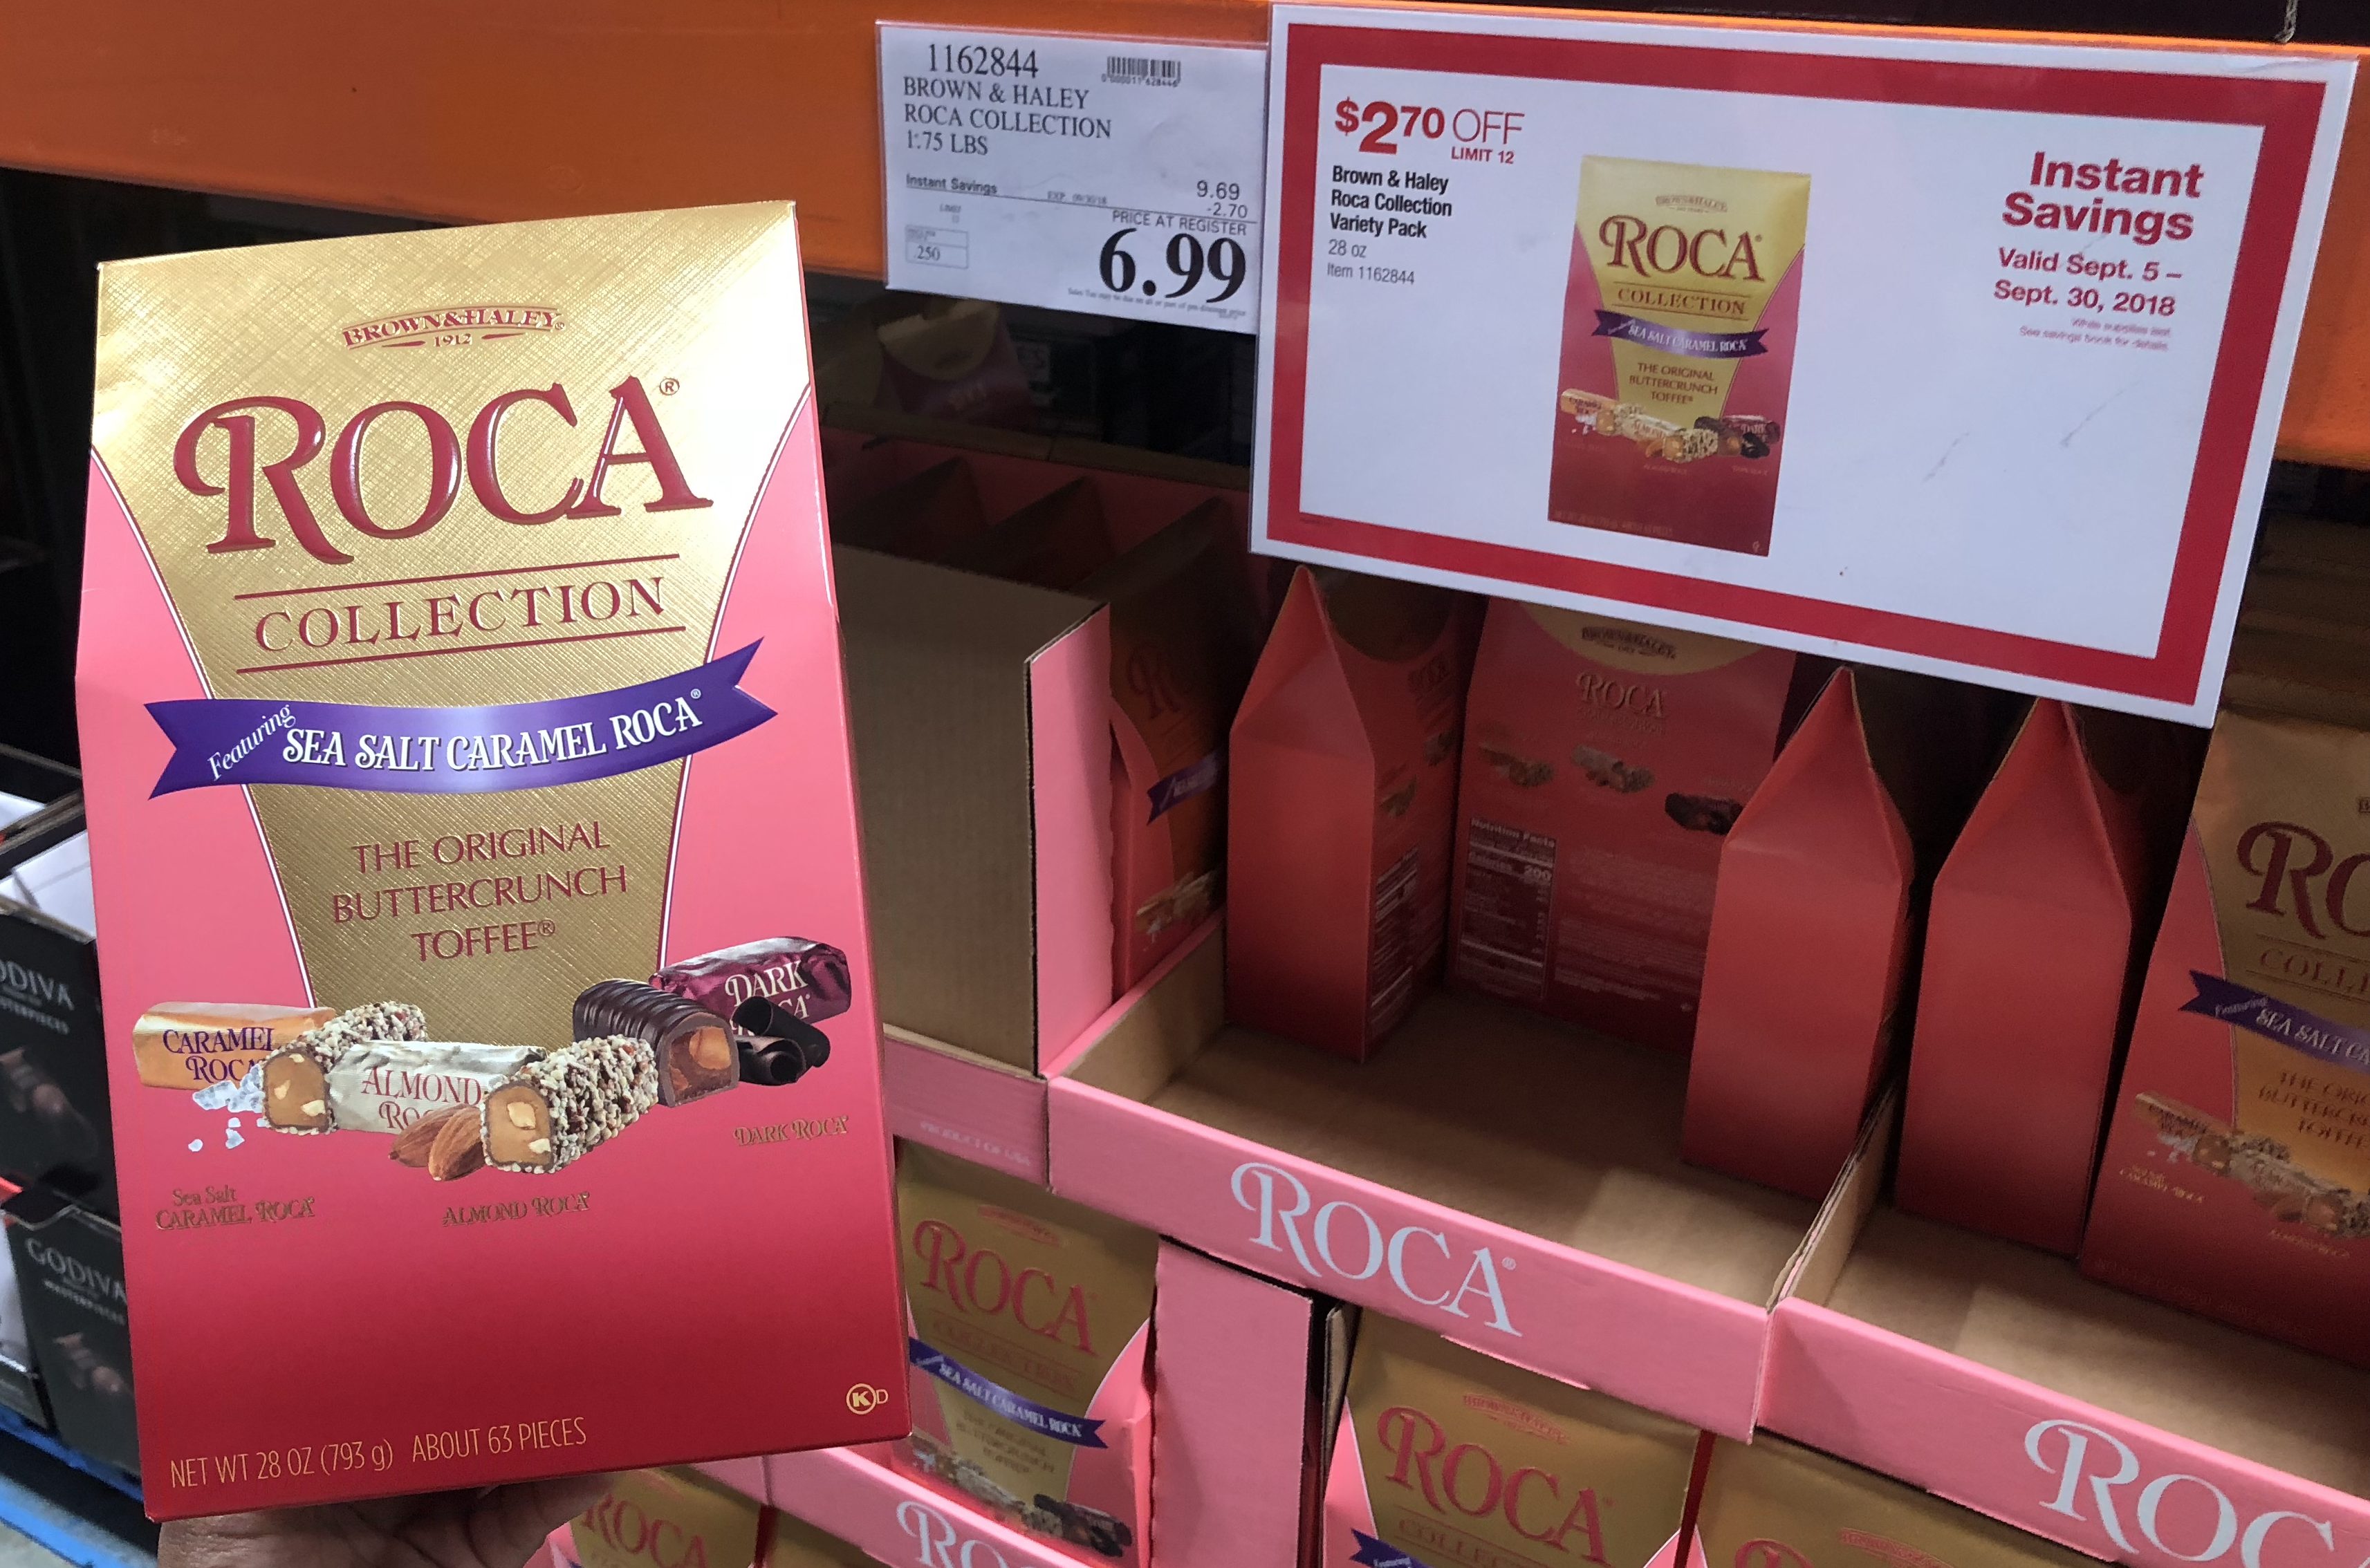 Costco Monthly Deals for September 2018 - Roca caramels at Costco